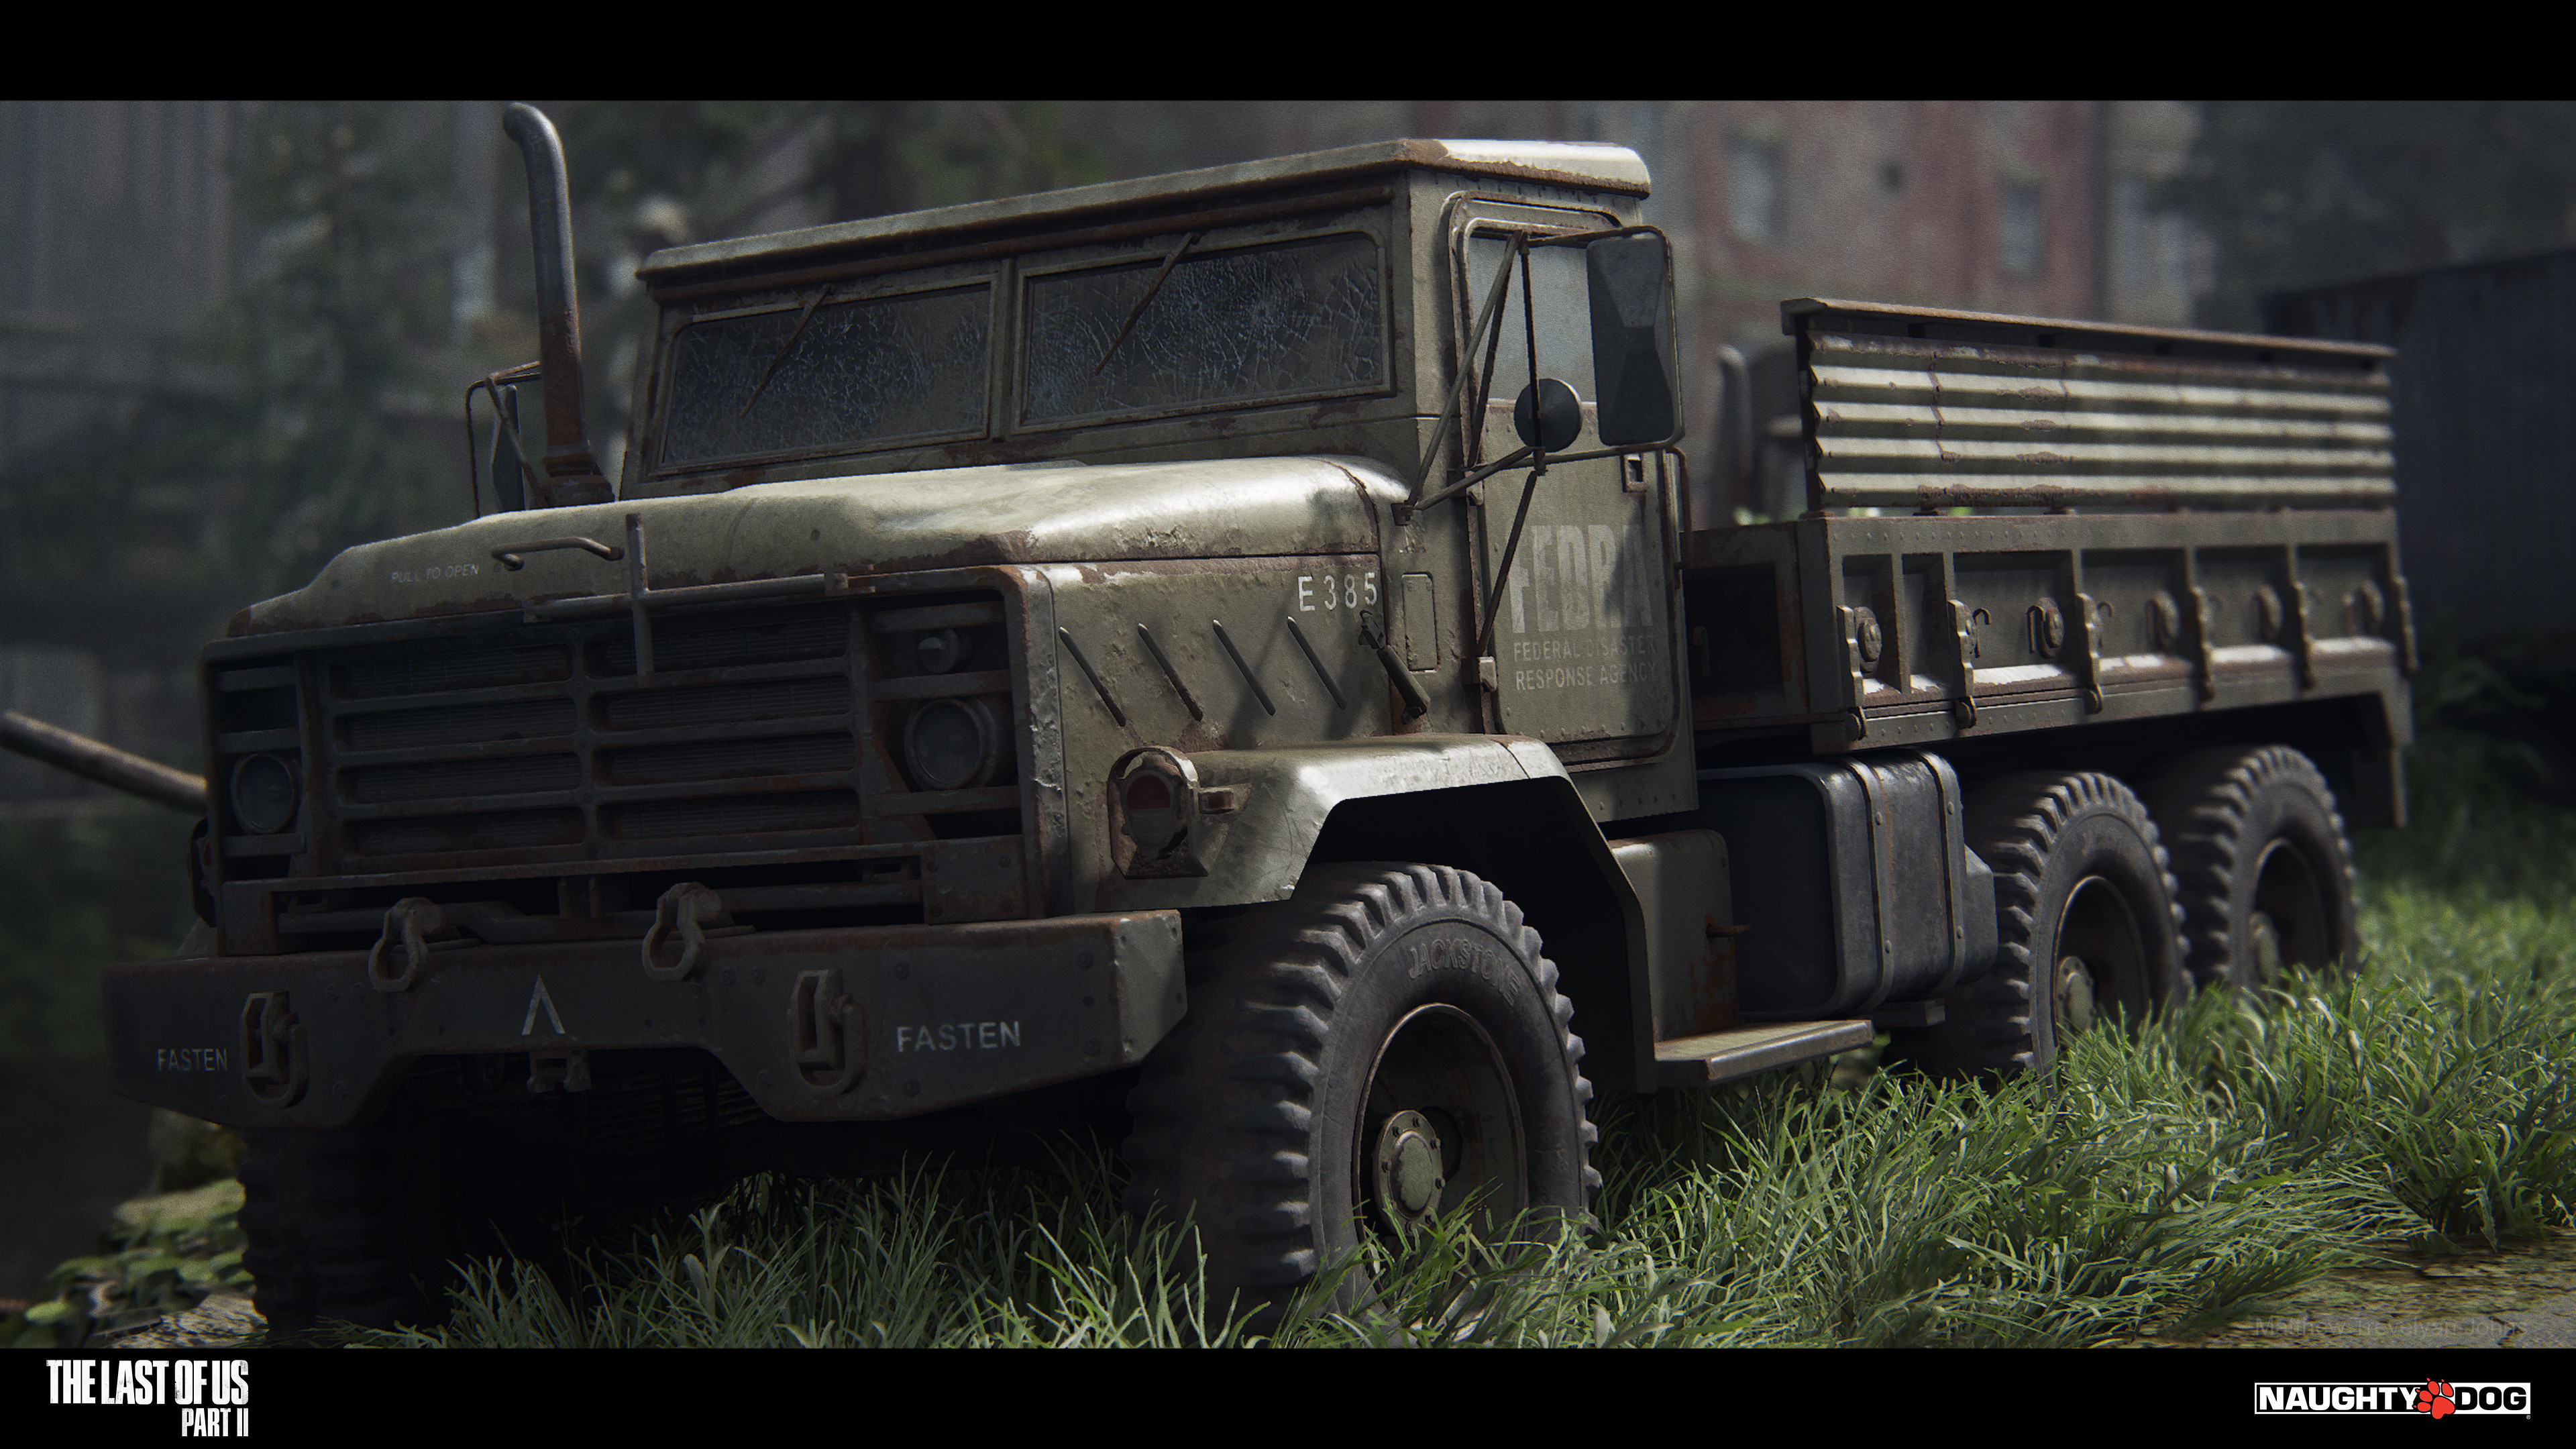 For the military truck design I borrowed heavily from existing vehicles, mixing elements to keep it recognisable but make it our own. These were huge vehicles in game and needed to be climbable as well as fully modular to create lots of variation. 